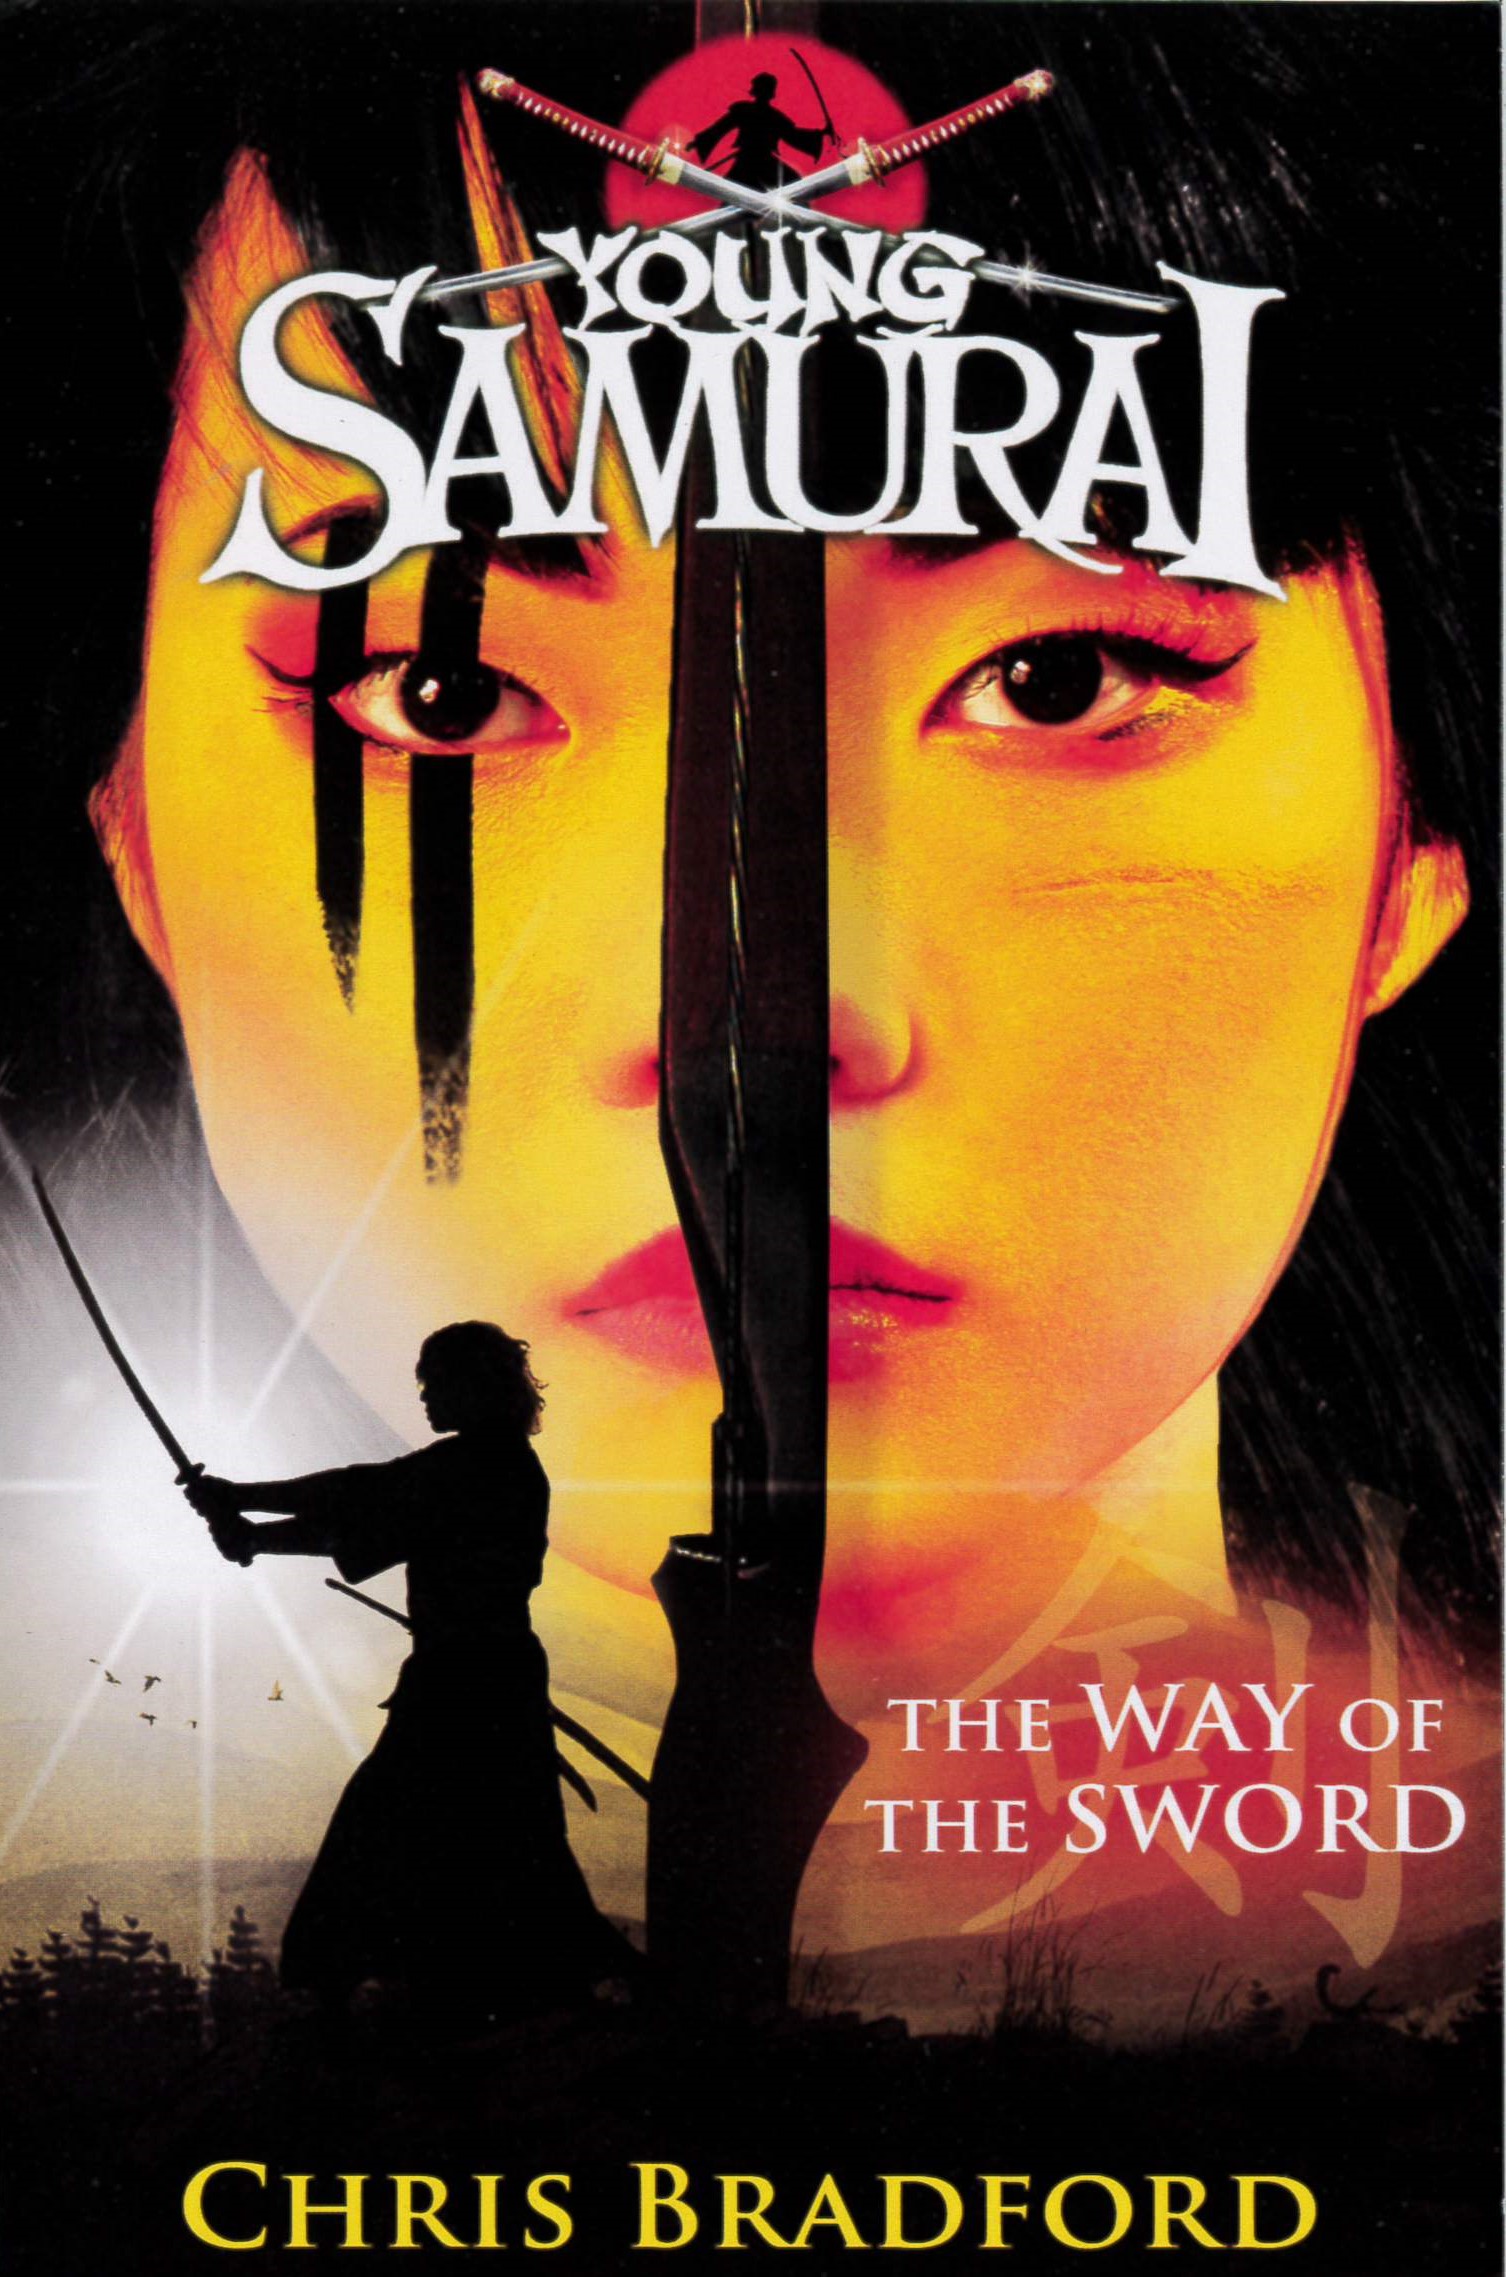 The way of the sword